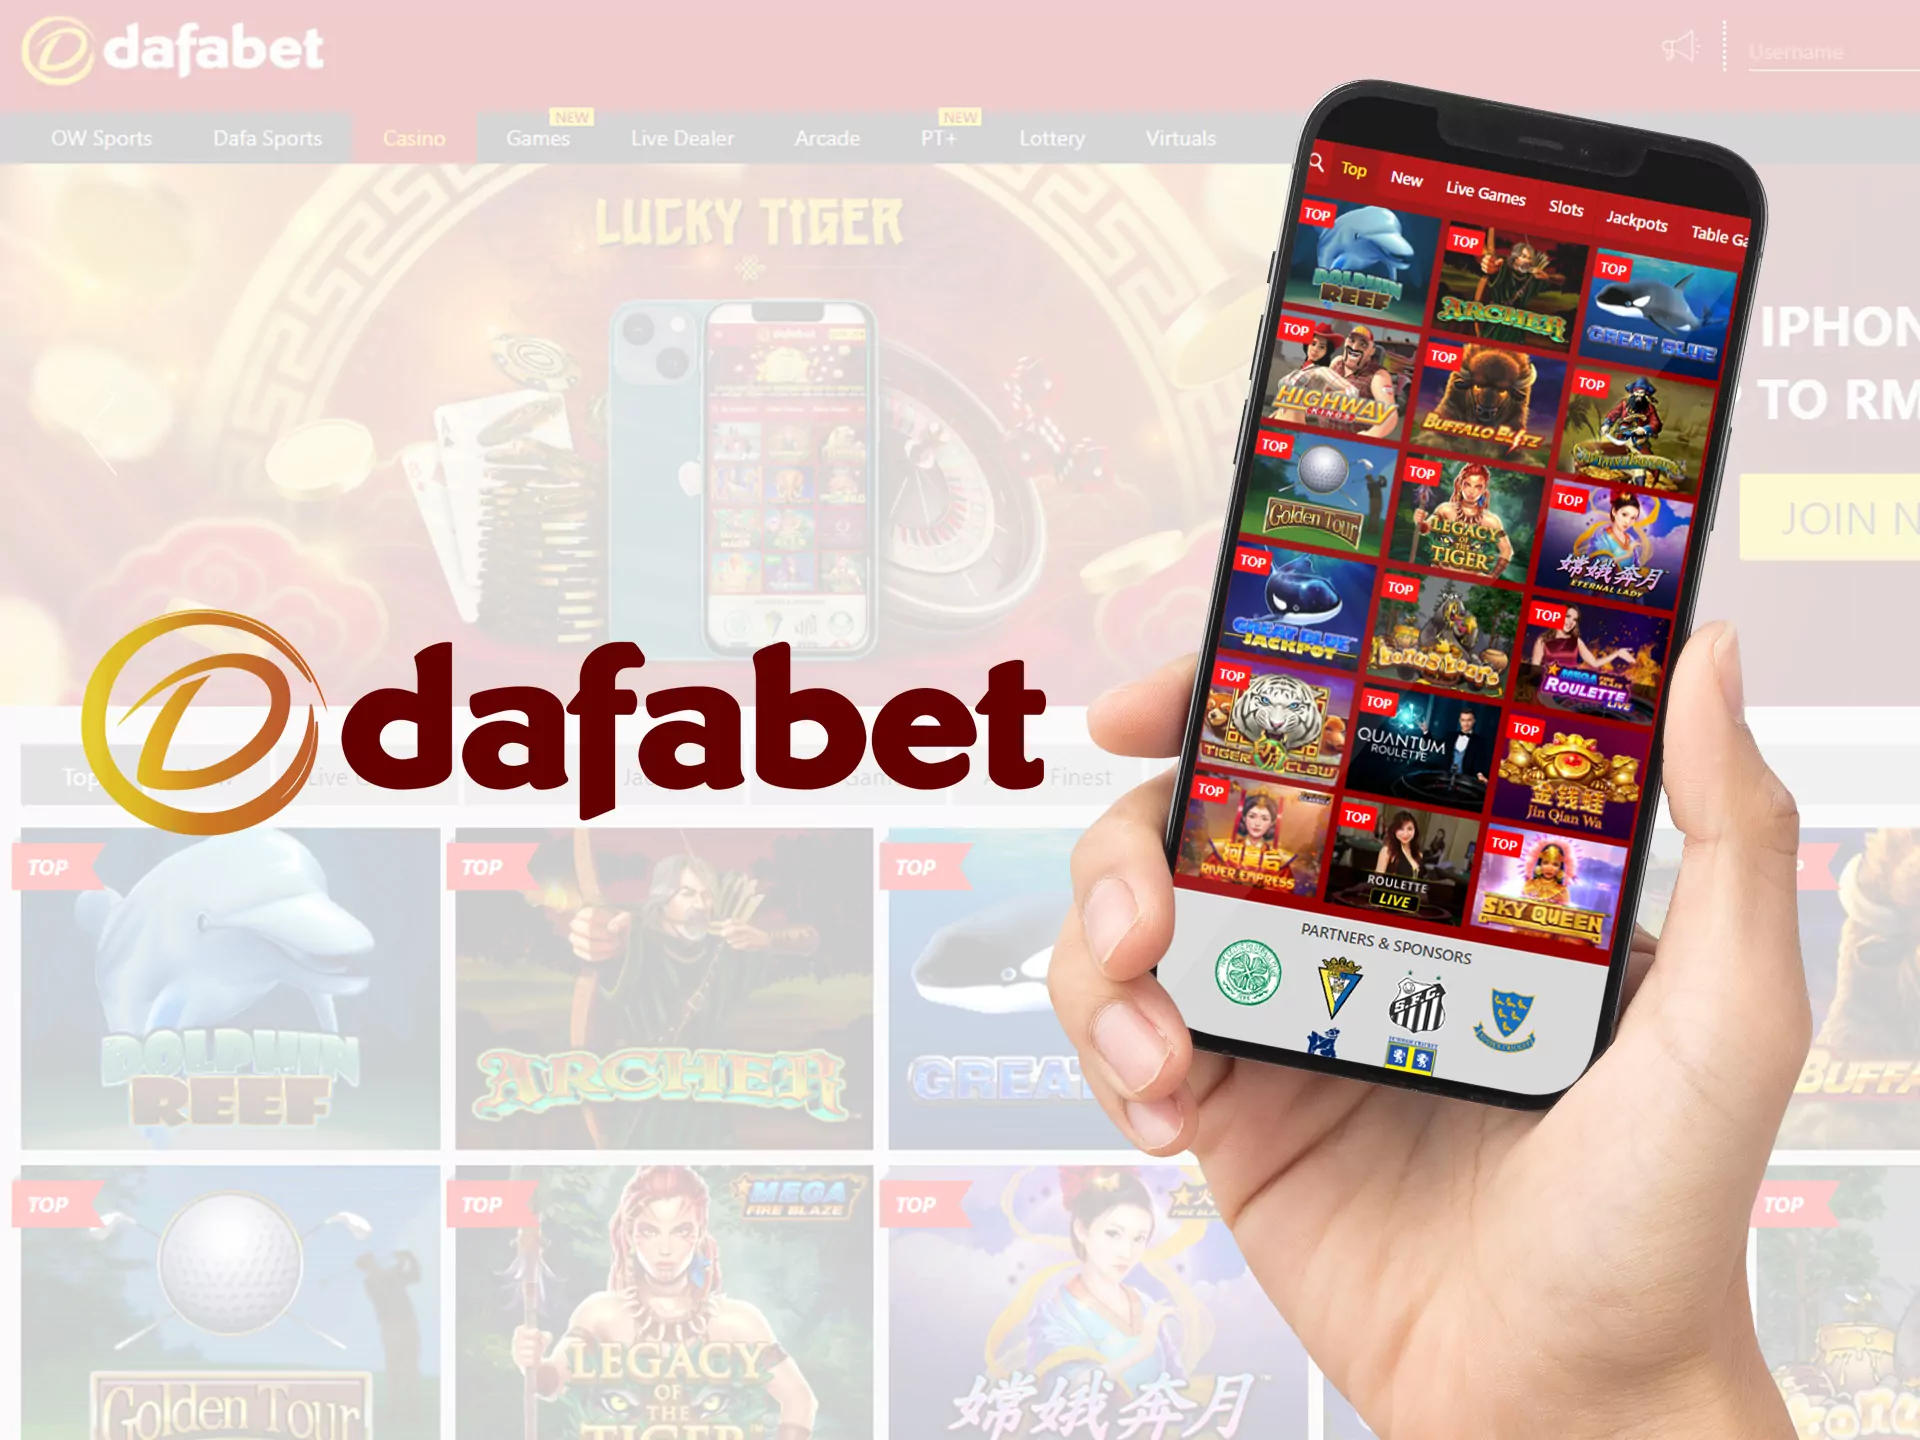 Dafabet provides various features in app.